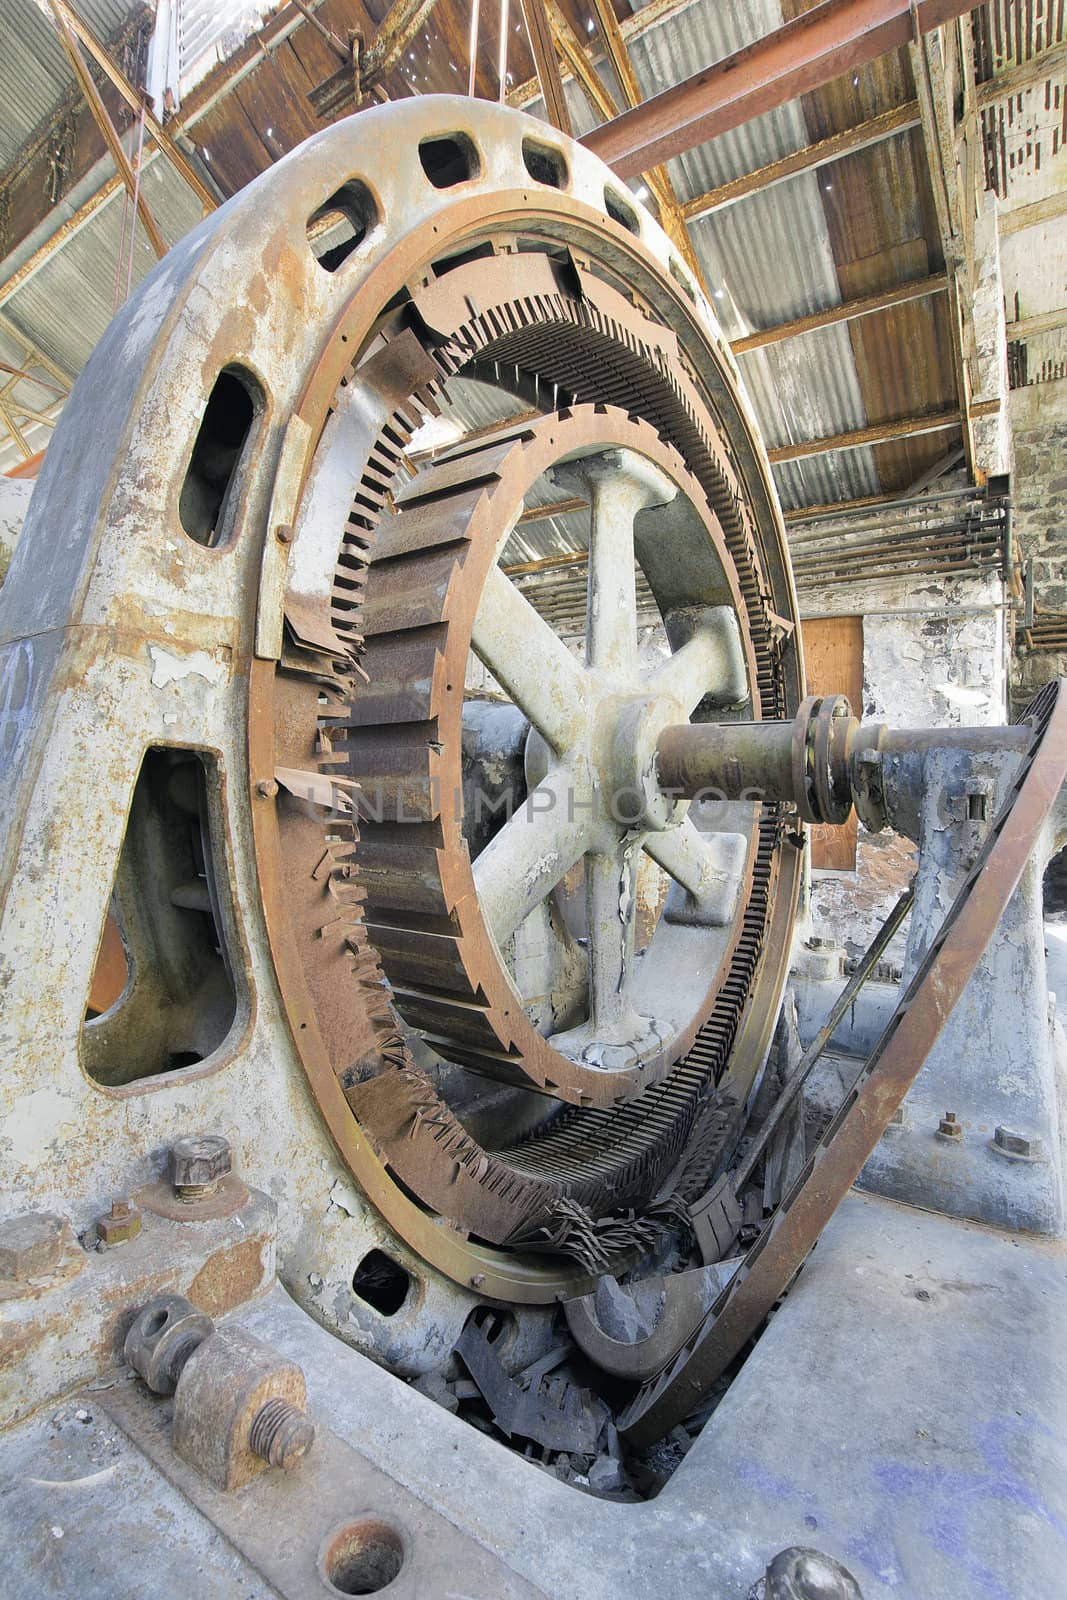 Old Hydroelectric Power Plant Turbine by jpldesigns